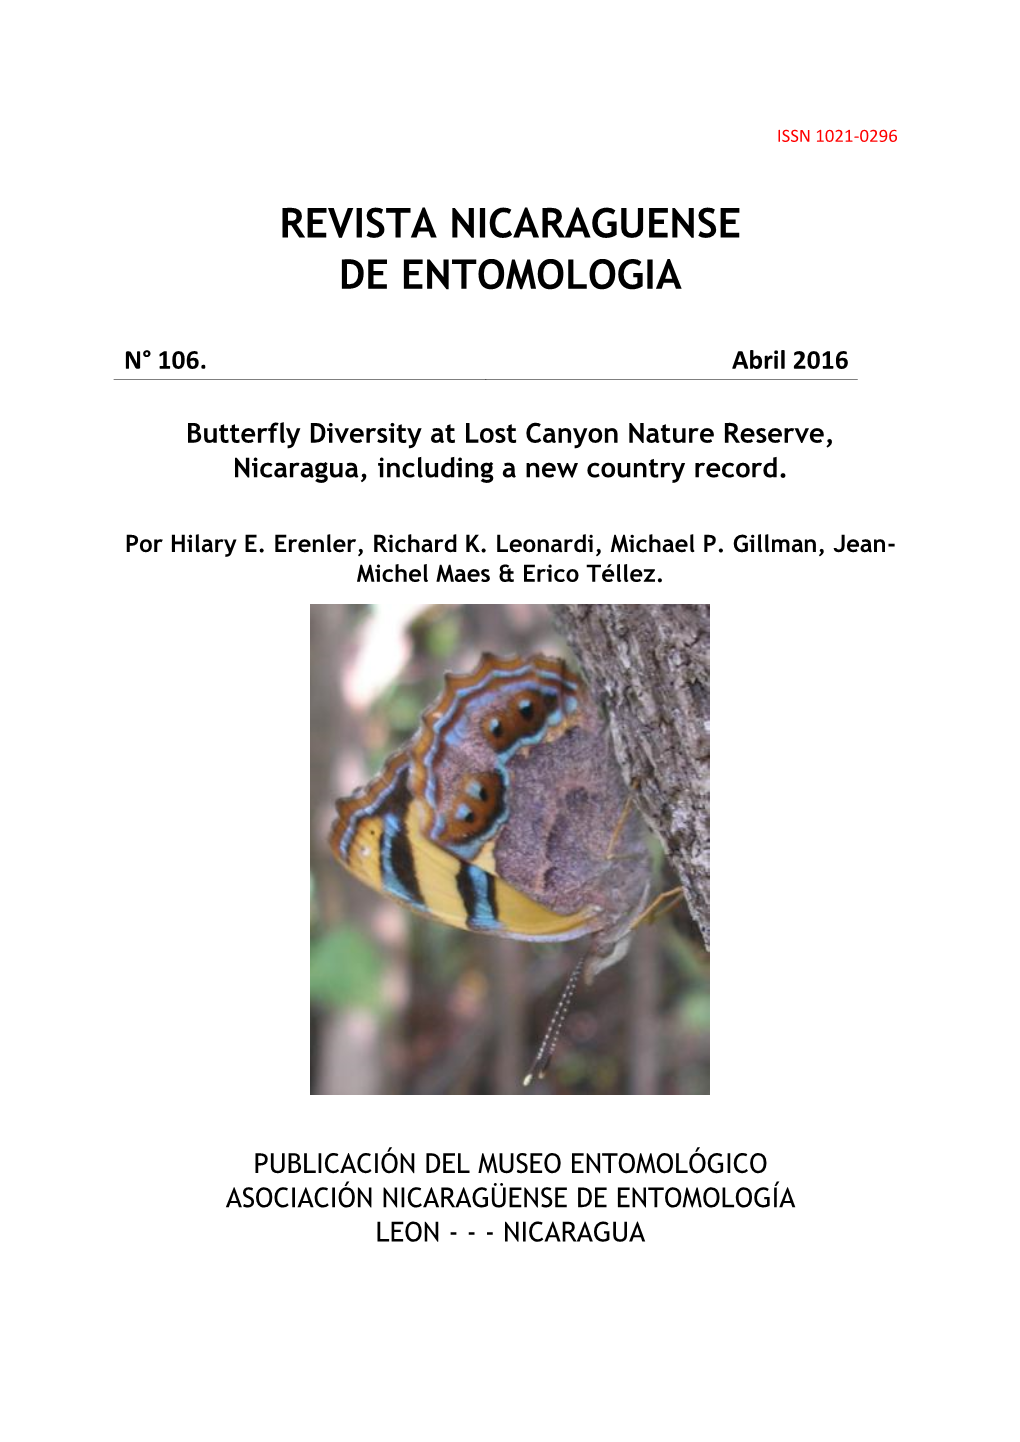 Butterfly Diversity at Lost Canyon Nature Reserve, Nicaragua, Including a New Country Record